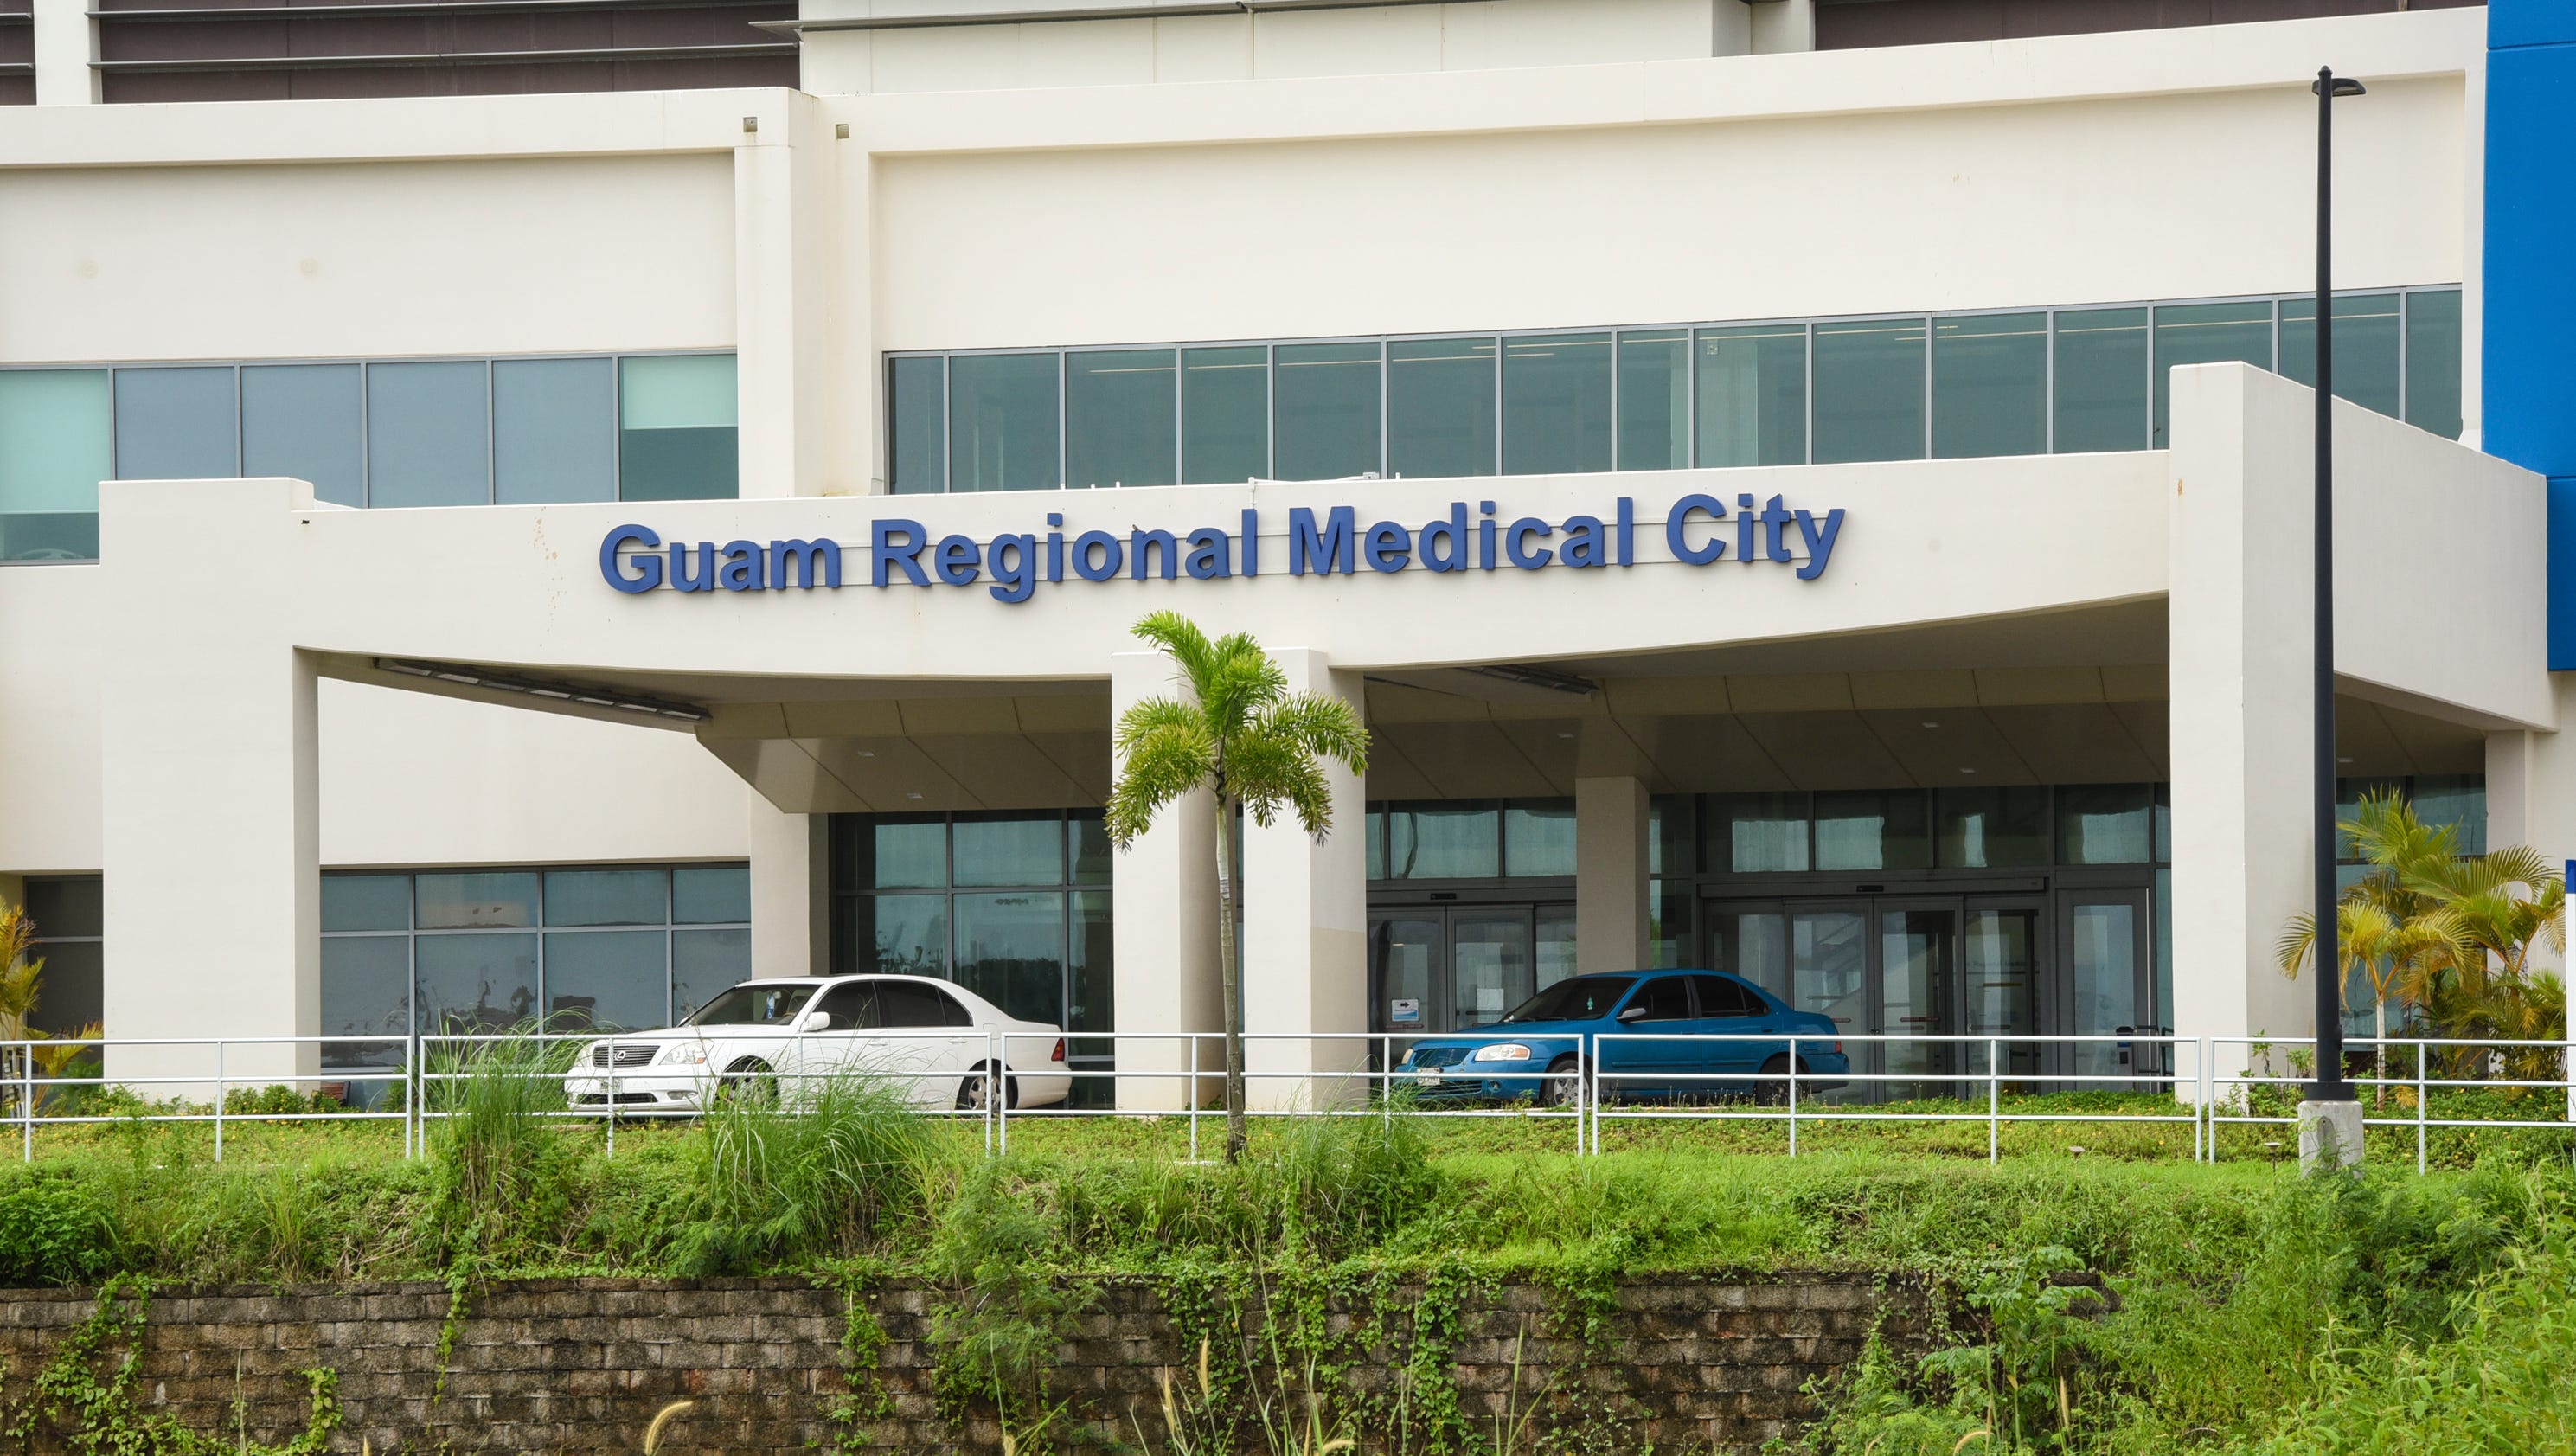 What services do Guam Real Estate offer?